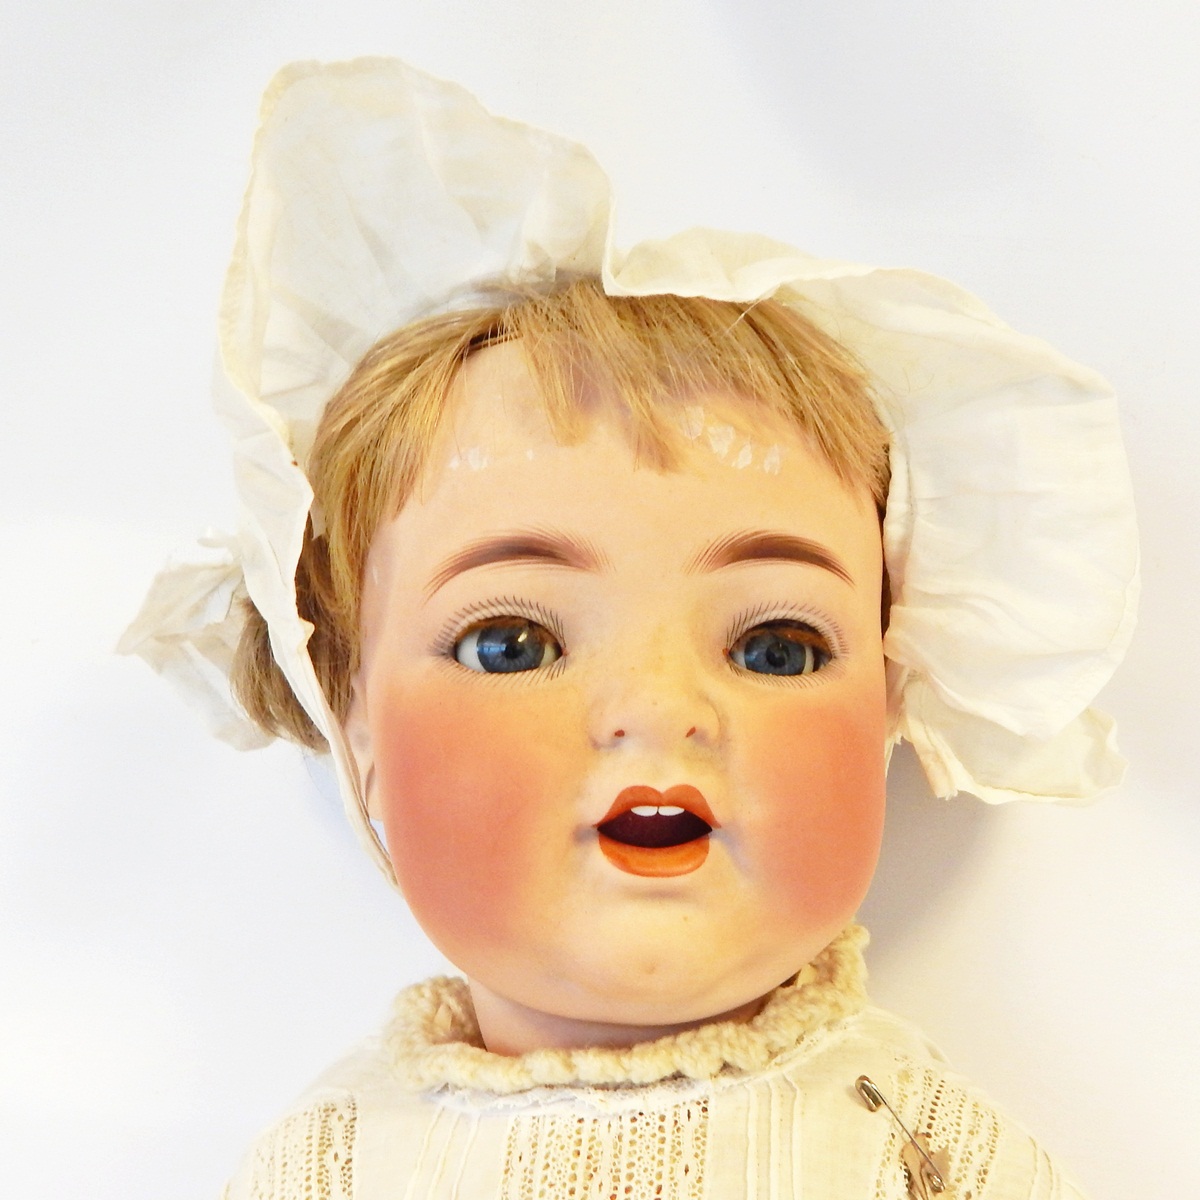 Bisque headed Heubach Koppelsdorf doll marked 342. - Image 2 of 2